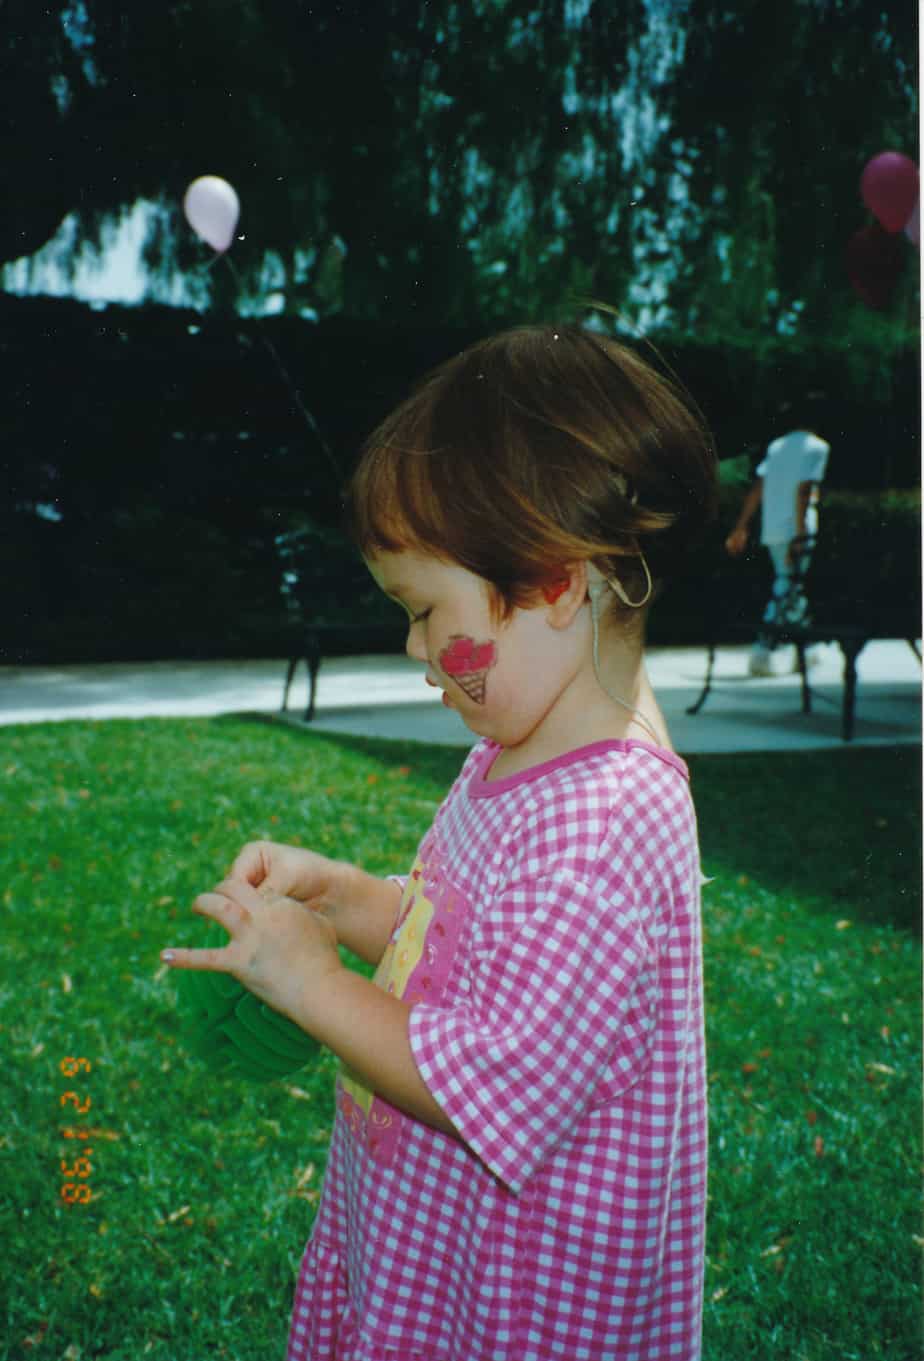 A photo of Abigail Heringer, cochlear implant recipient, as a child